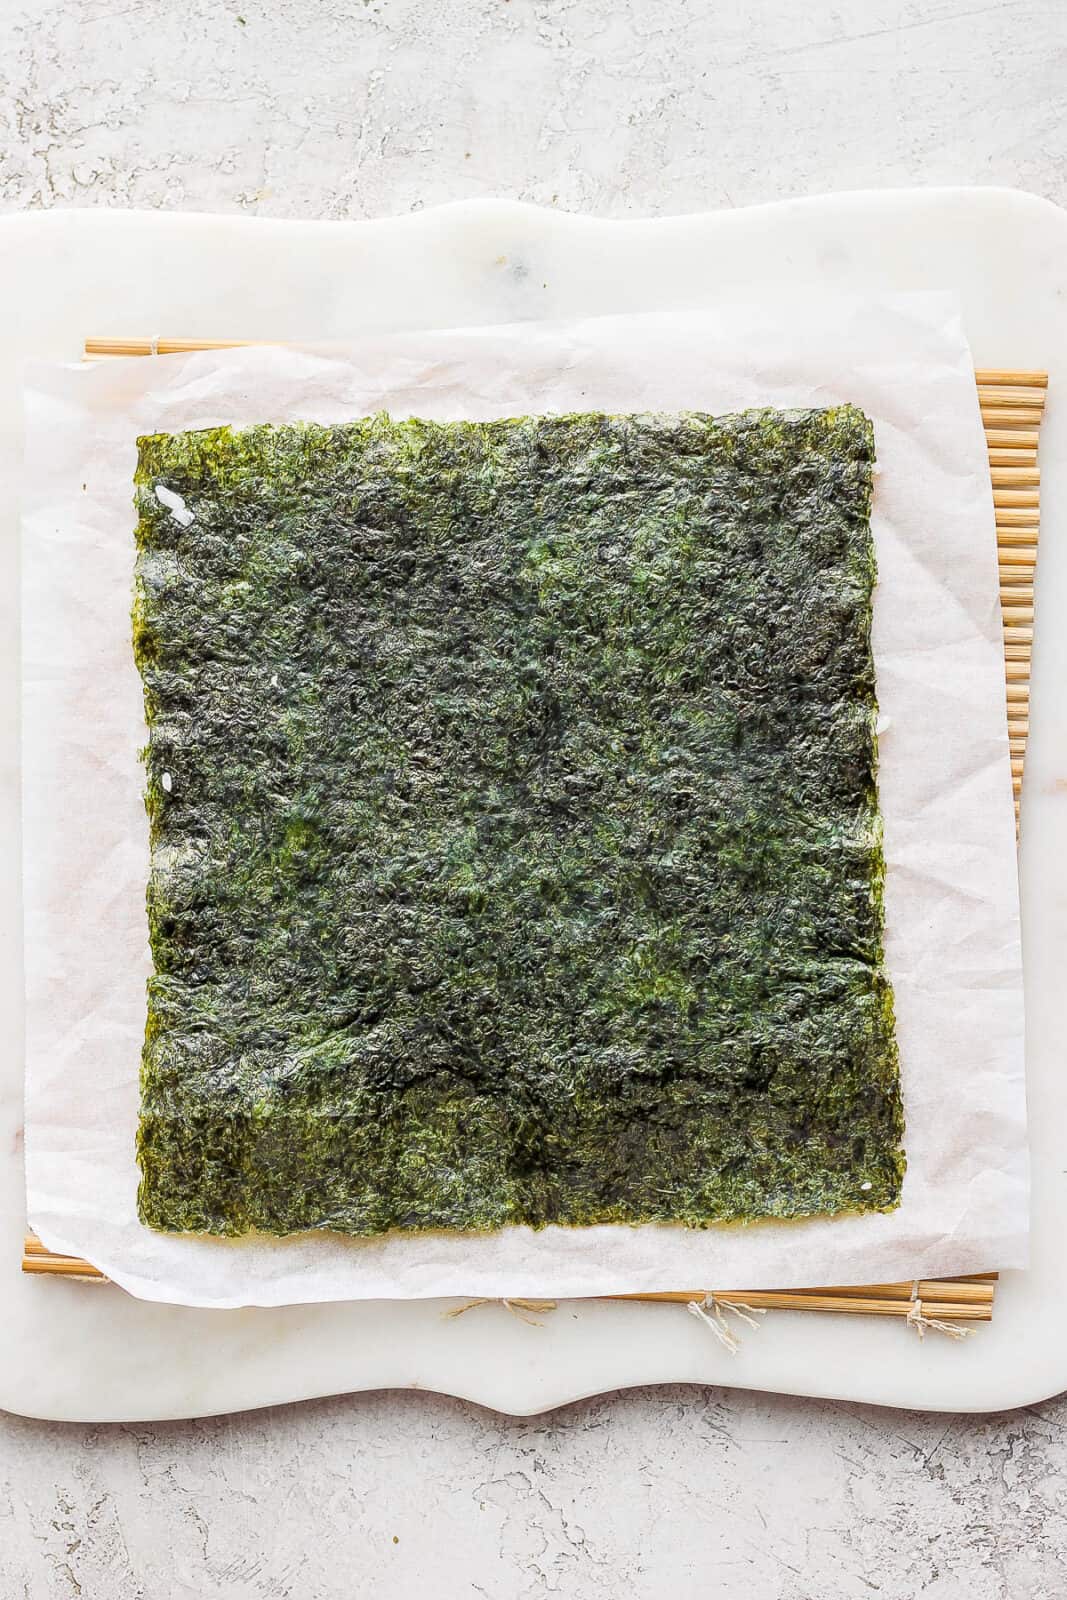 The nori sheet on top of the parchment paper with the rice-side down.